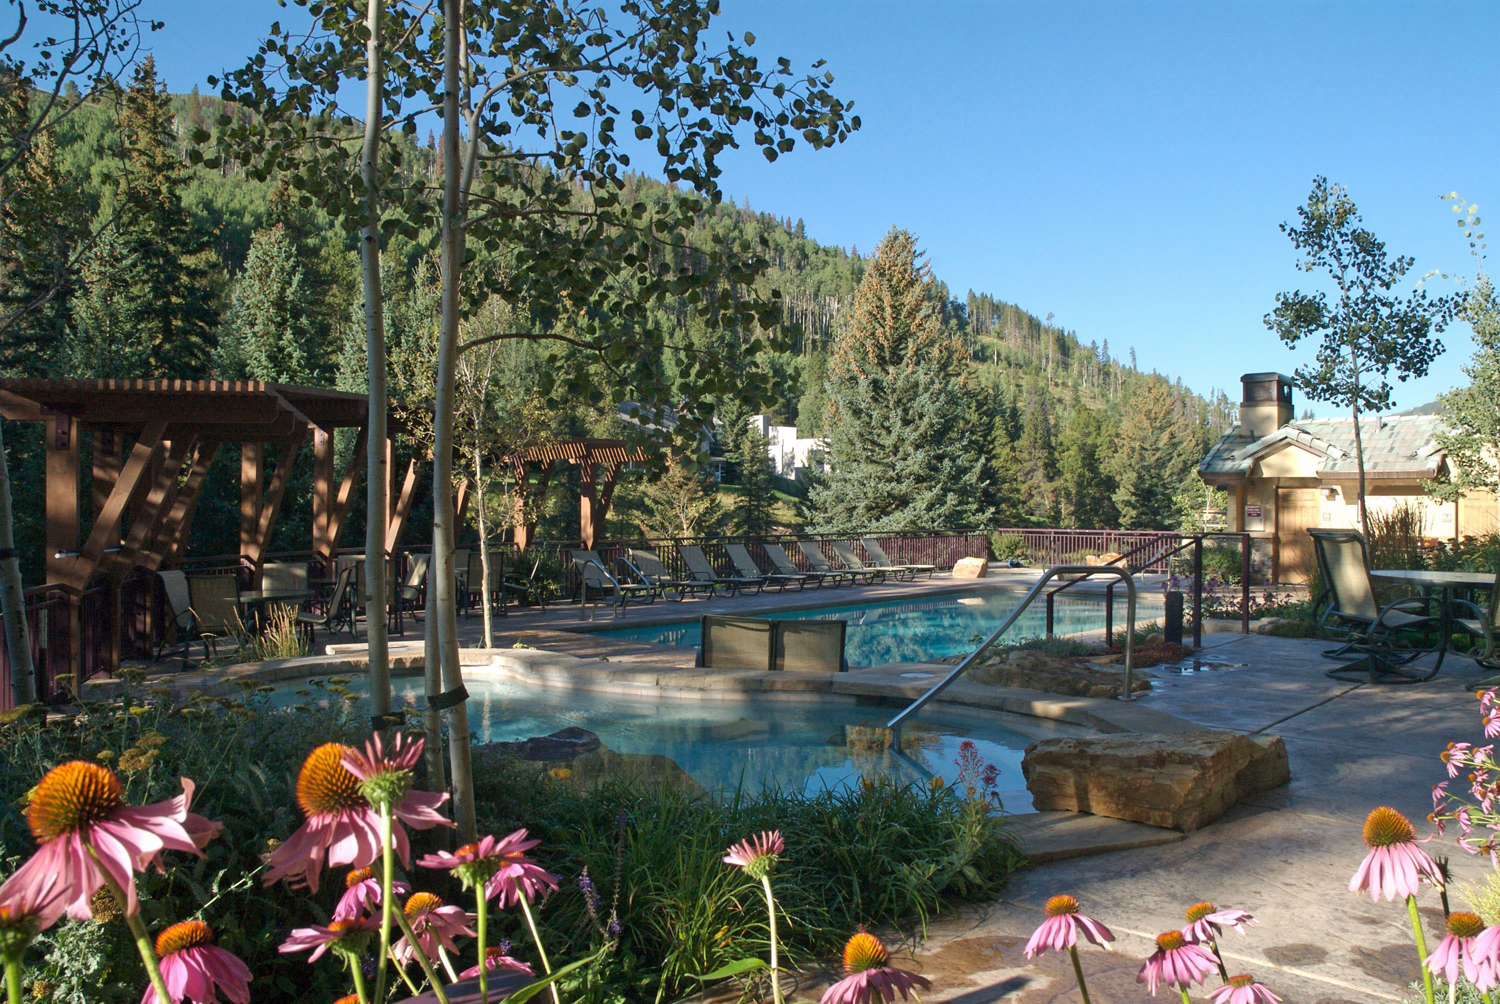 Known for its prime location with a pool overlooking Gore Creek and Vail Mountain Resort, Antlers at Vail will continue its famous “The answer is yes, now what was the question?” guest policy.